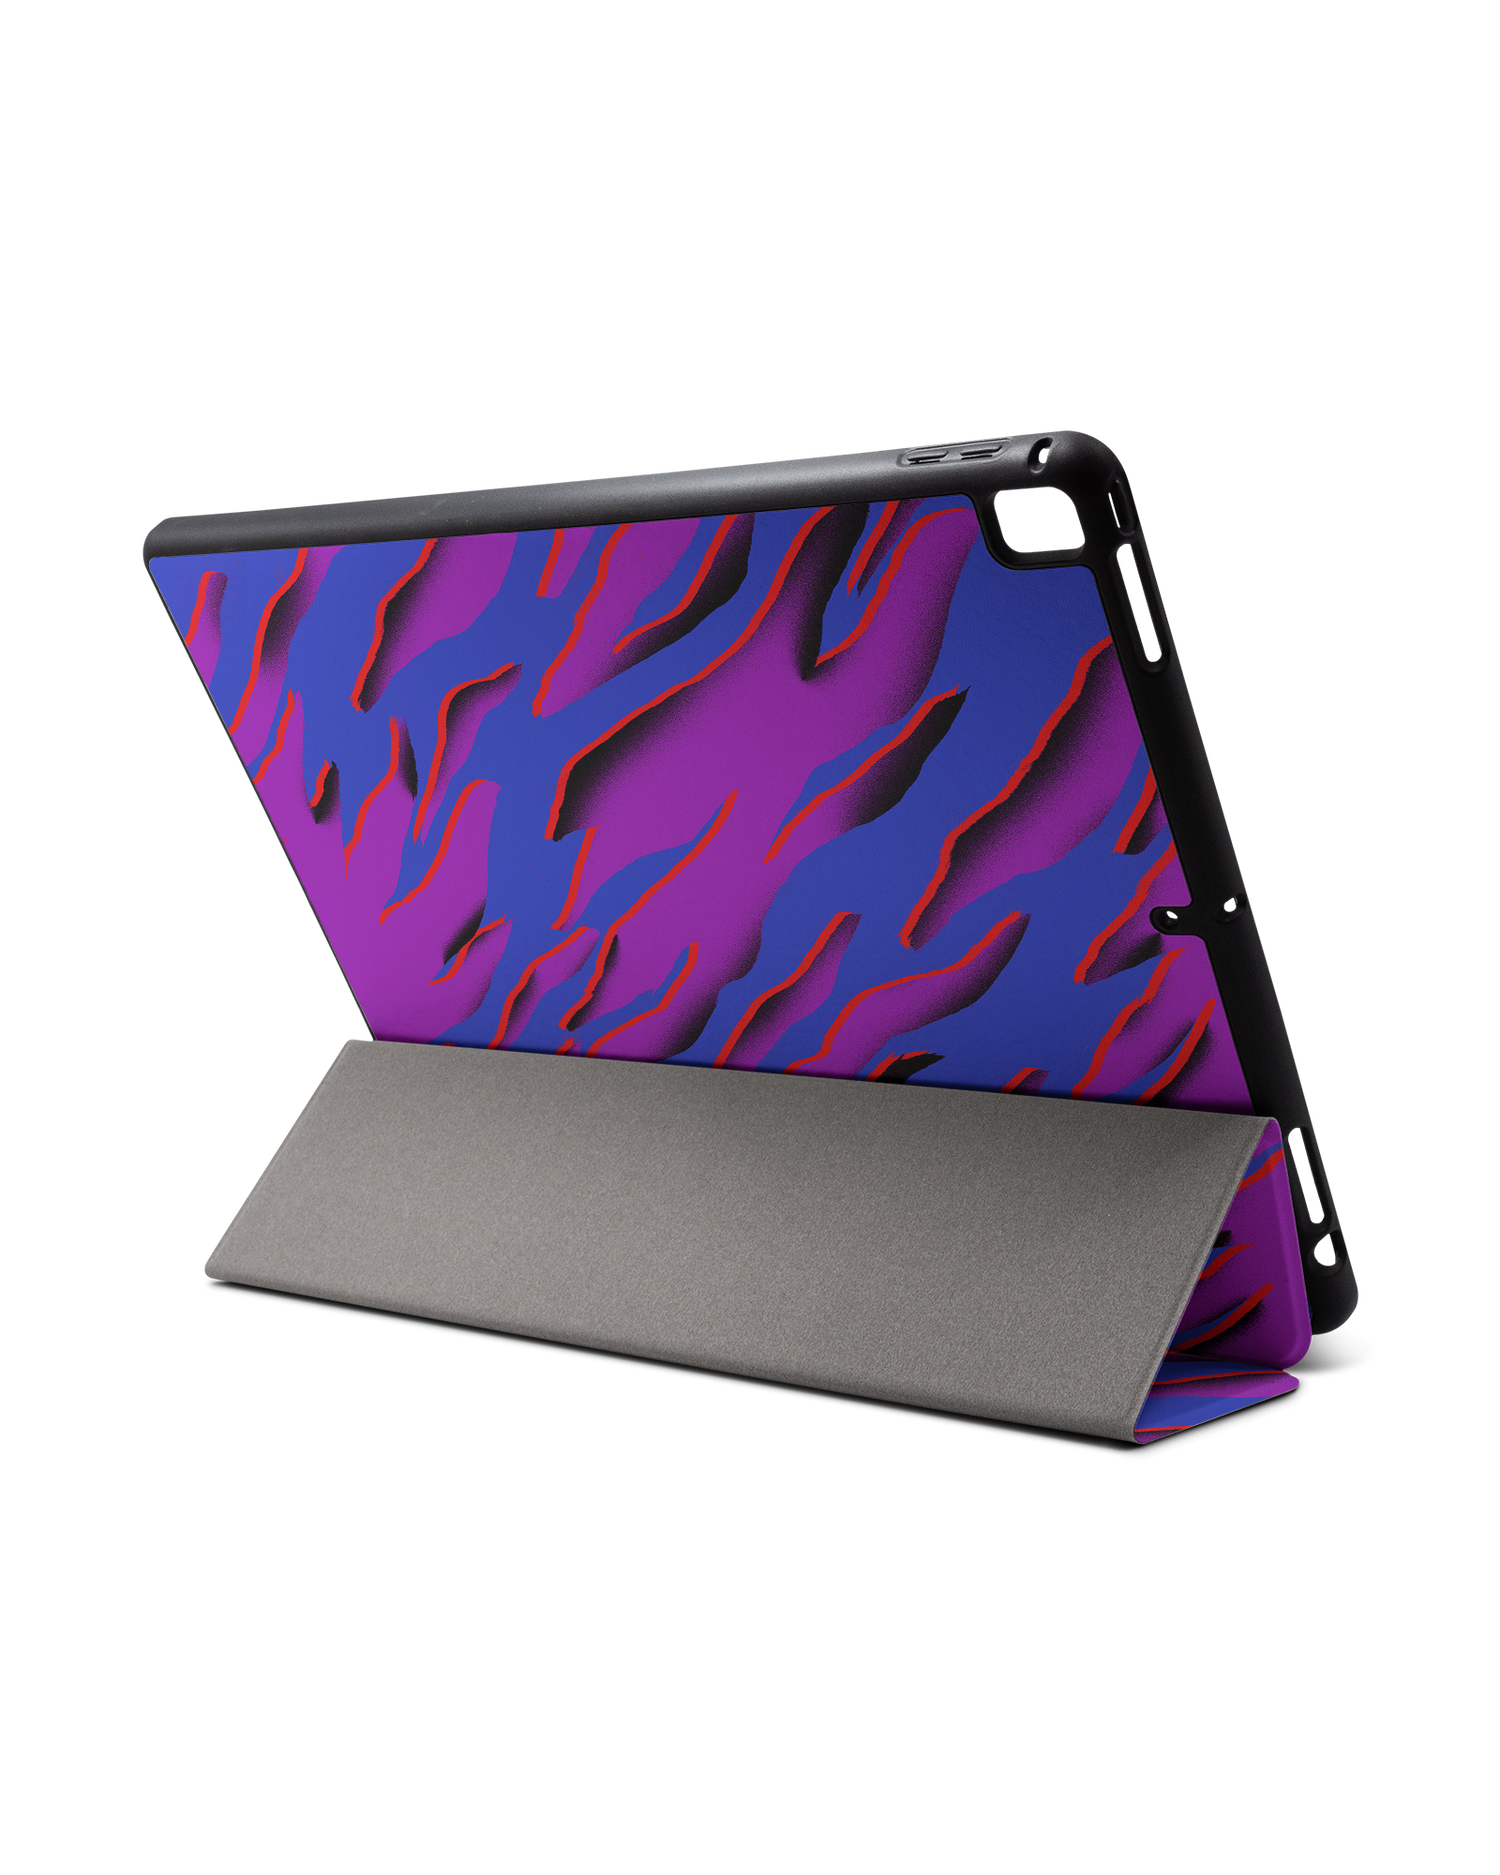 Electric Ocean 2 iPad Case with Pencil Holder for Apple iPad Pro 2 12.9